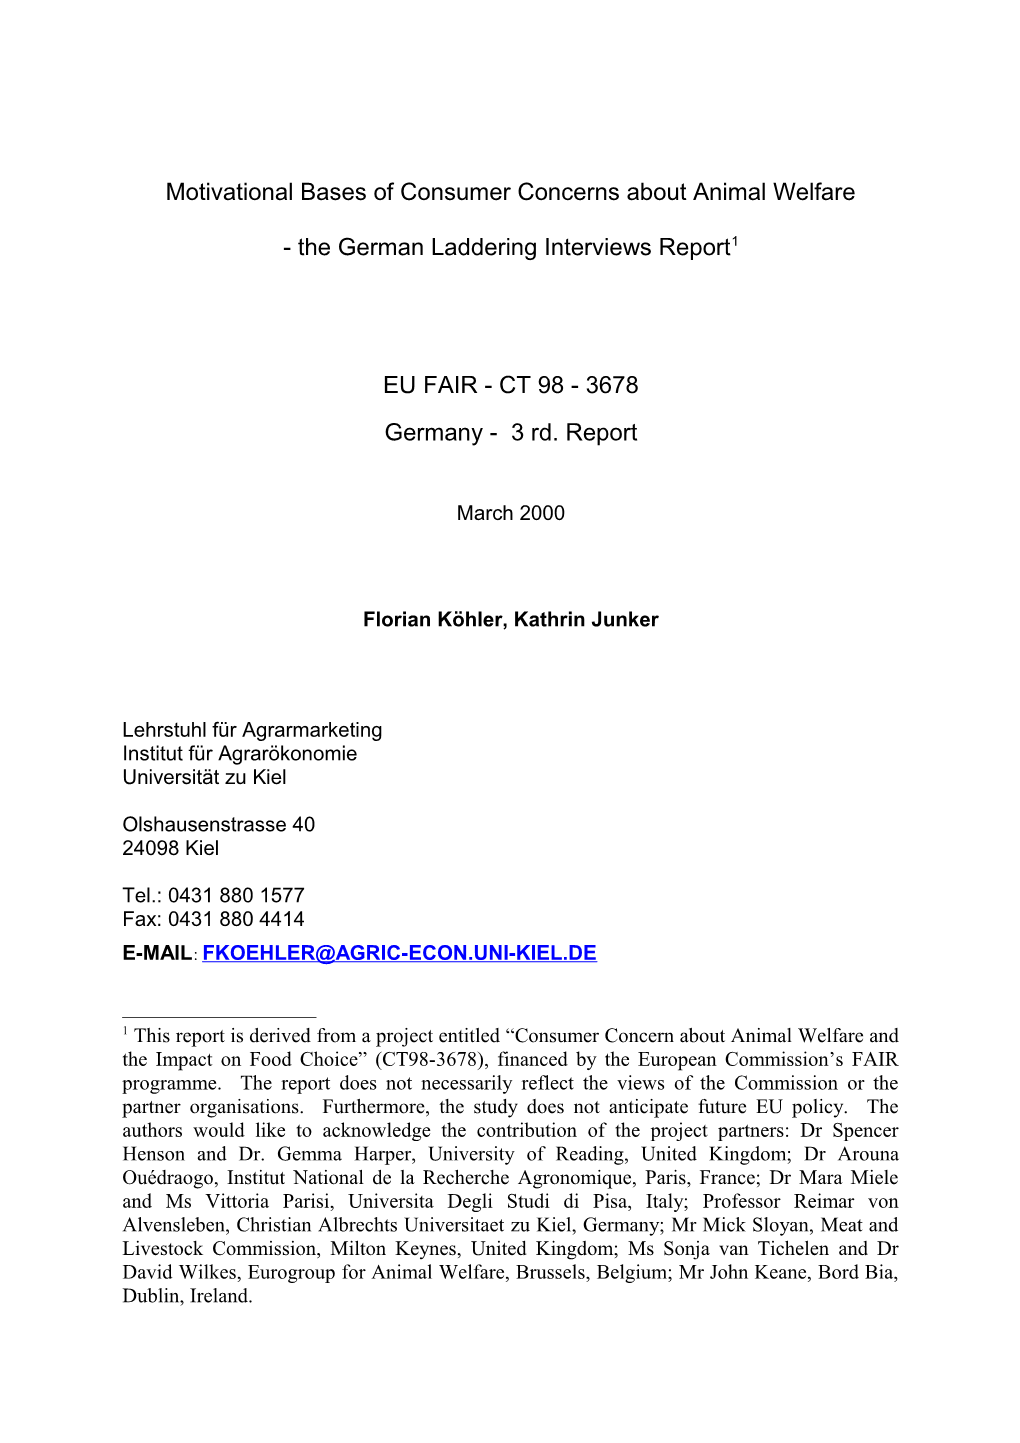 German Laddering Report (Motivational Bases of Consumer Concerns About Animal Welfare)